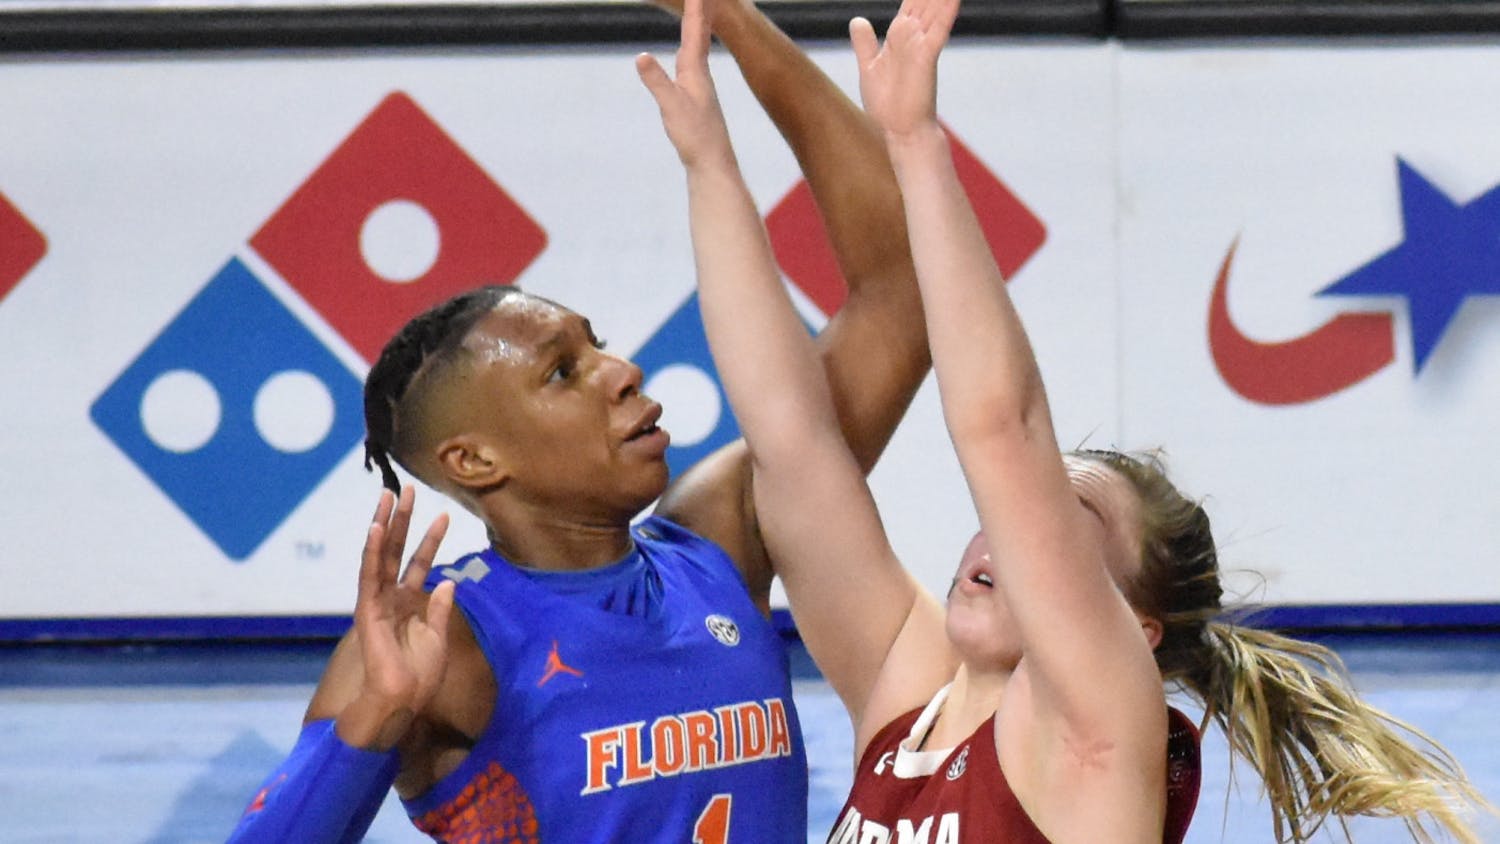  Smith, who became the team’s lead scorer in guard Lavender Briggs’ absence, had an underwhelming night with only 10 points to her name. Photo from UF-Alabama game Feb. 18.